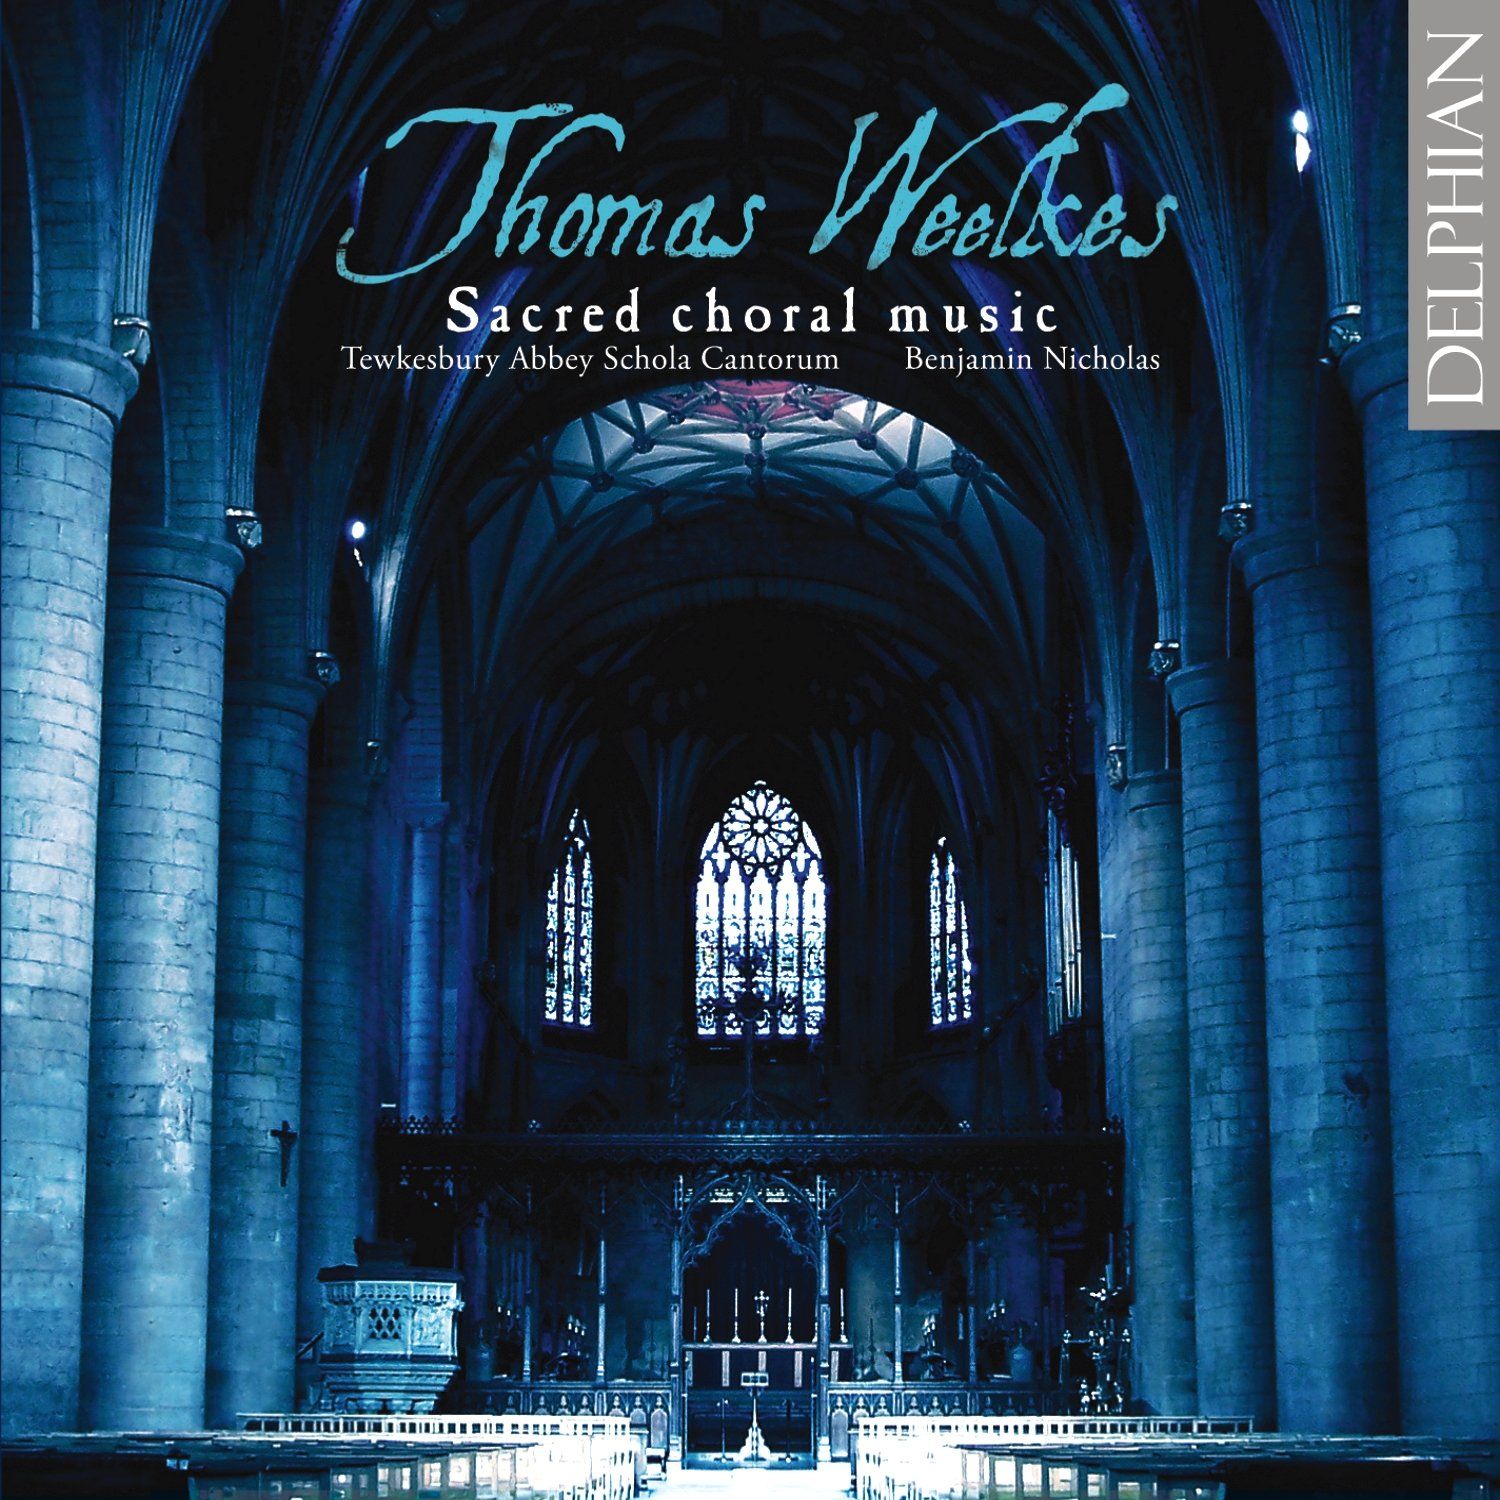 Weelkes: Sacred Choral Music CD Delphian Records